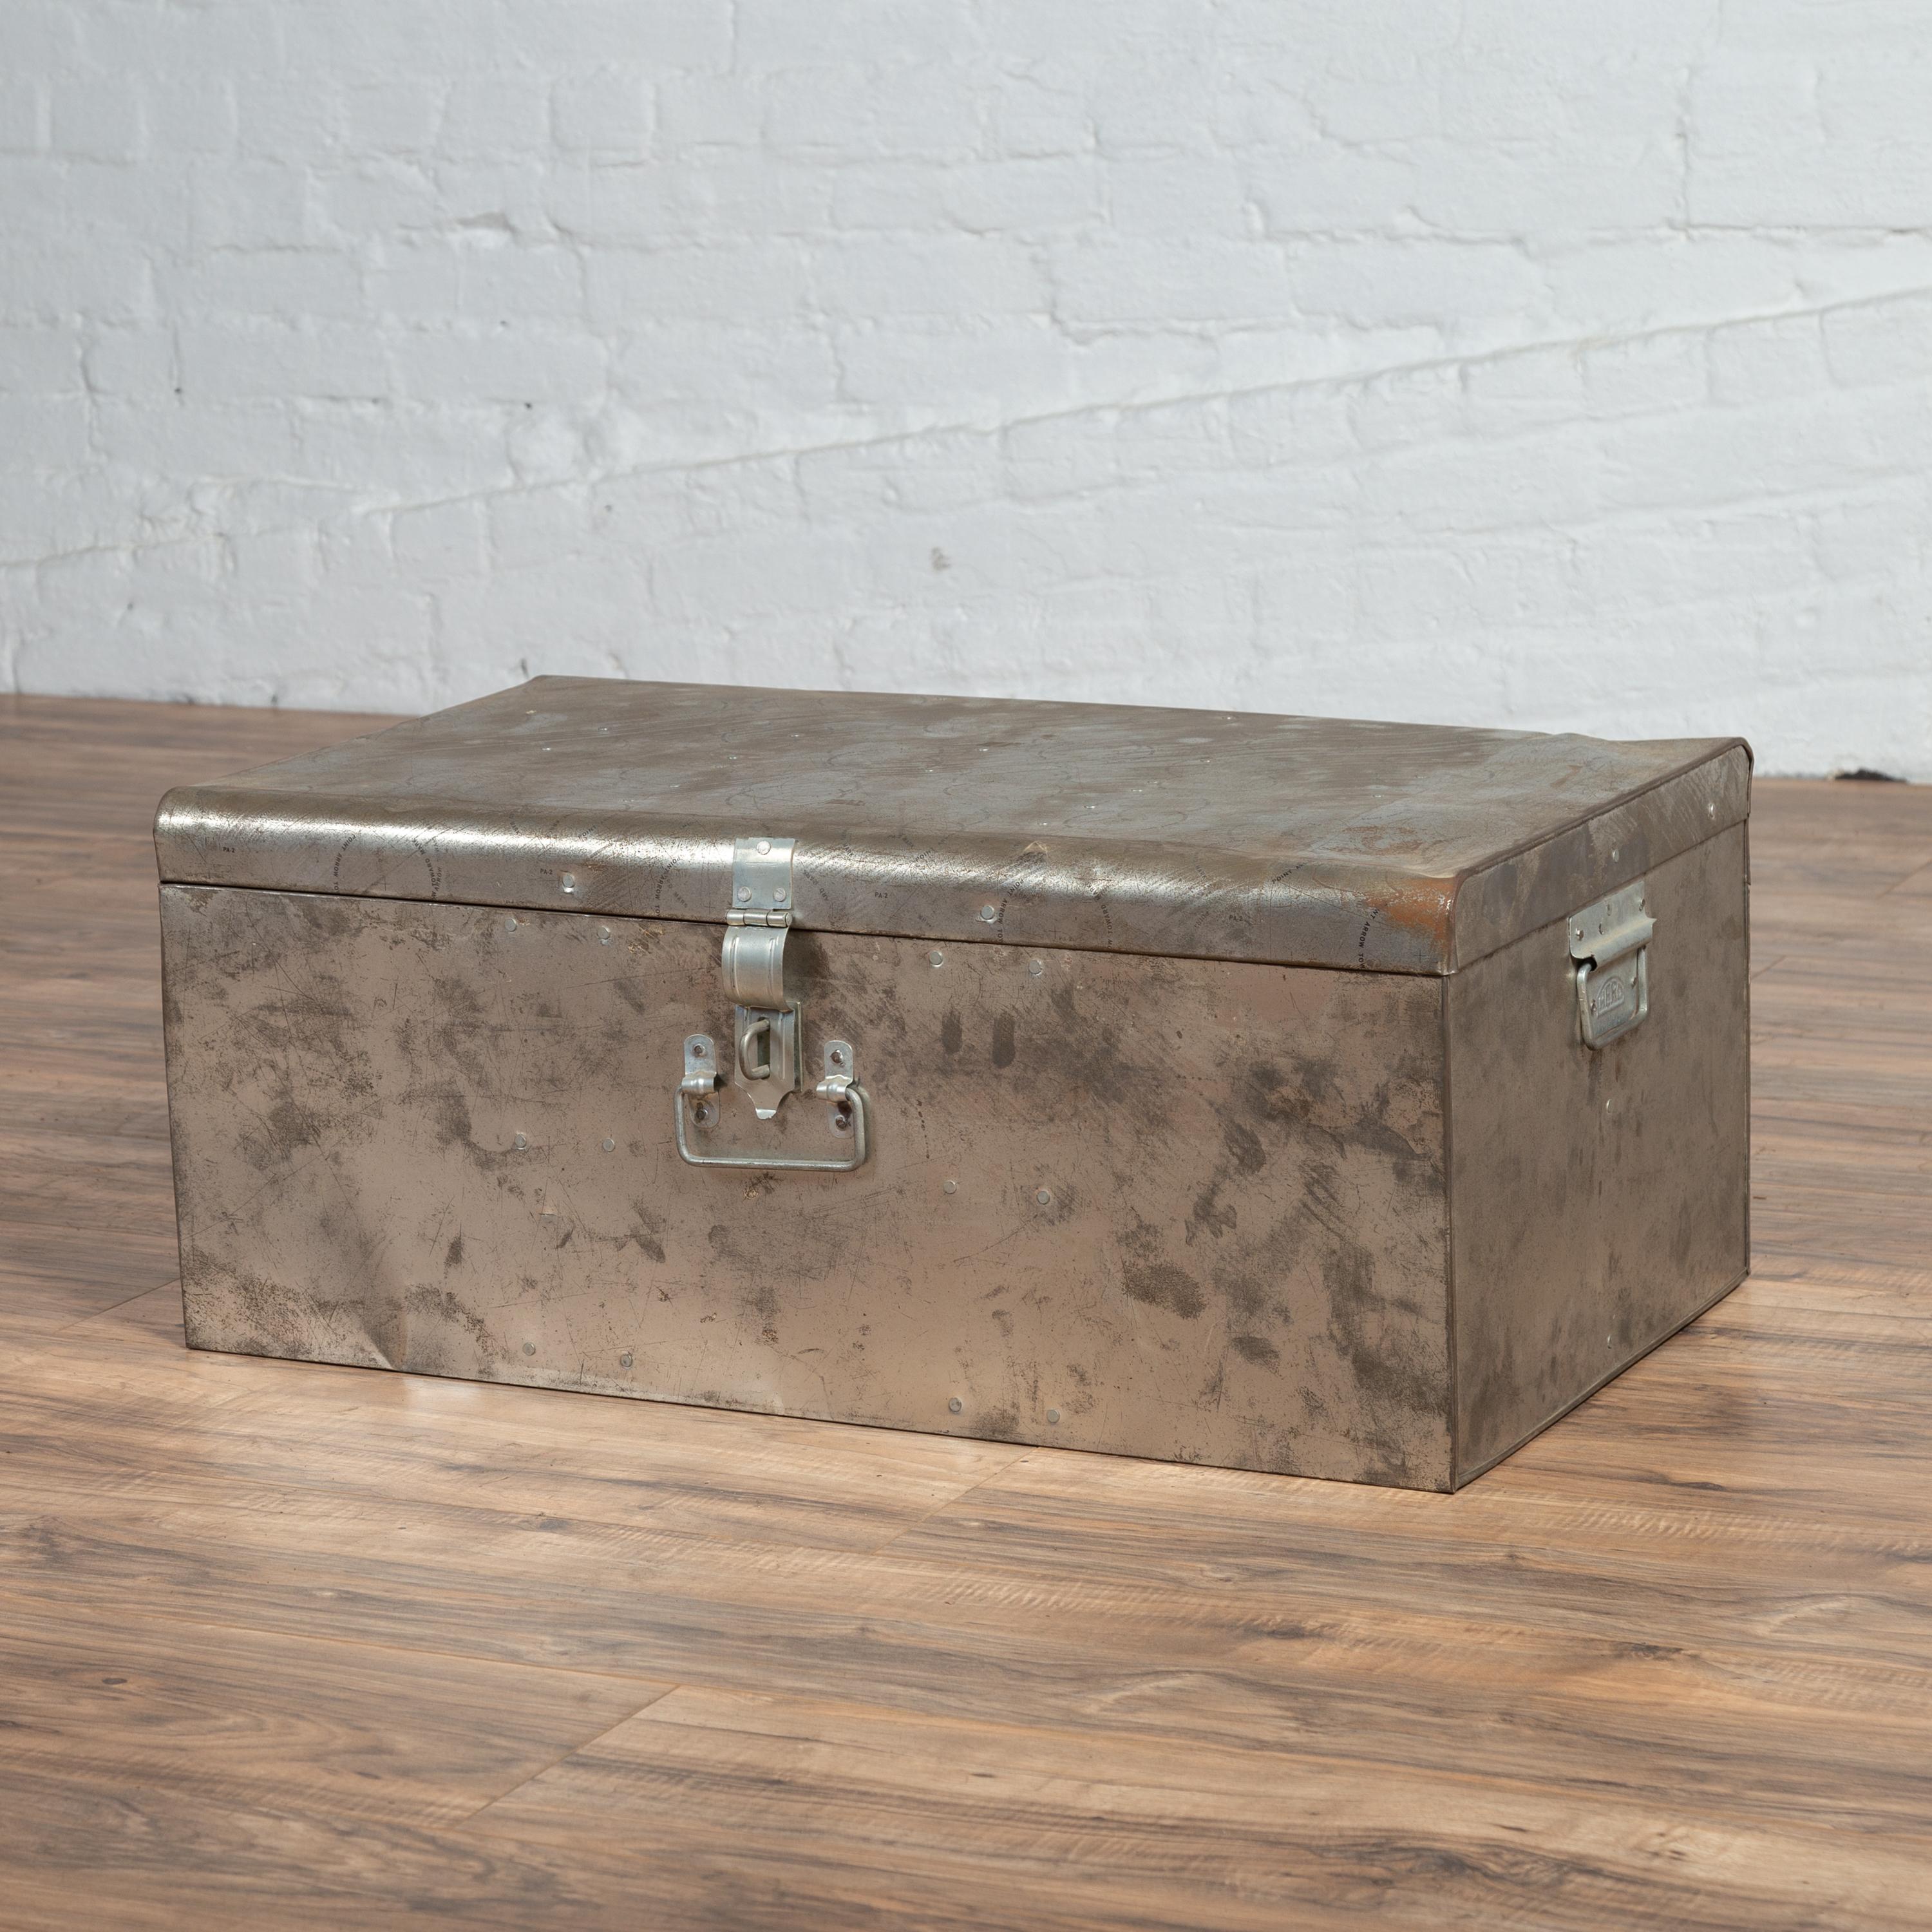 Indian Vintage Metal Tool Box with Distressed Silver Colored Finish and Handles 2